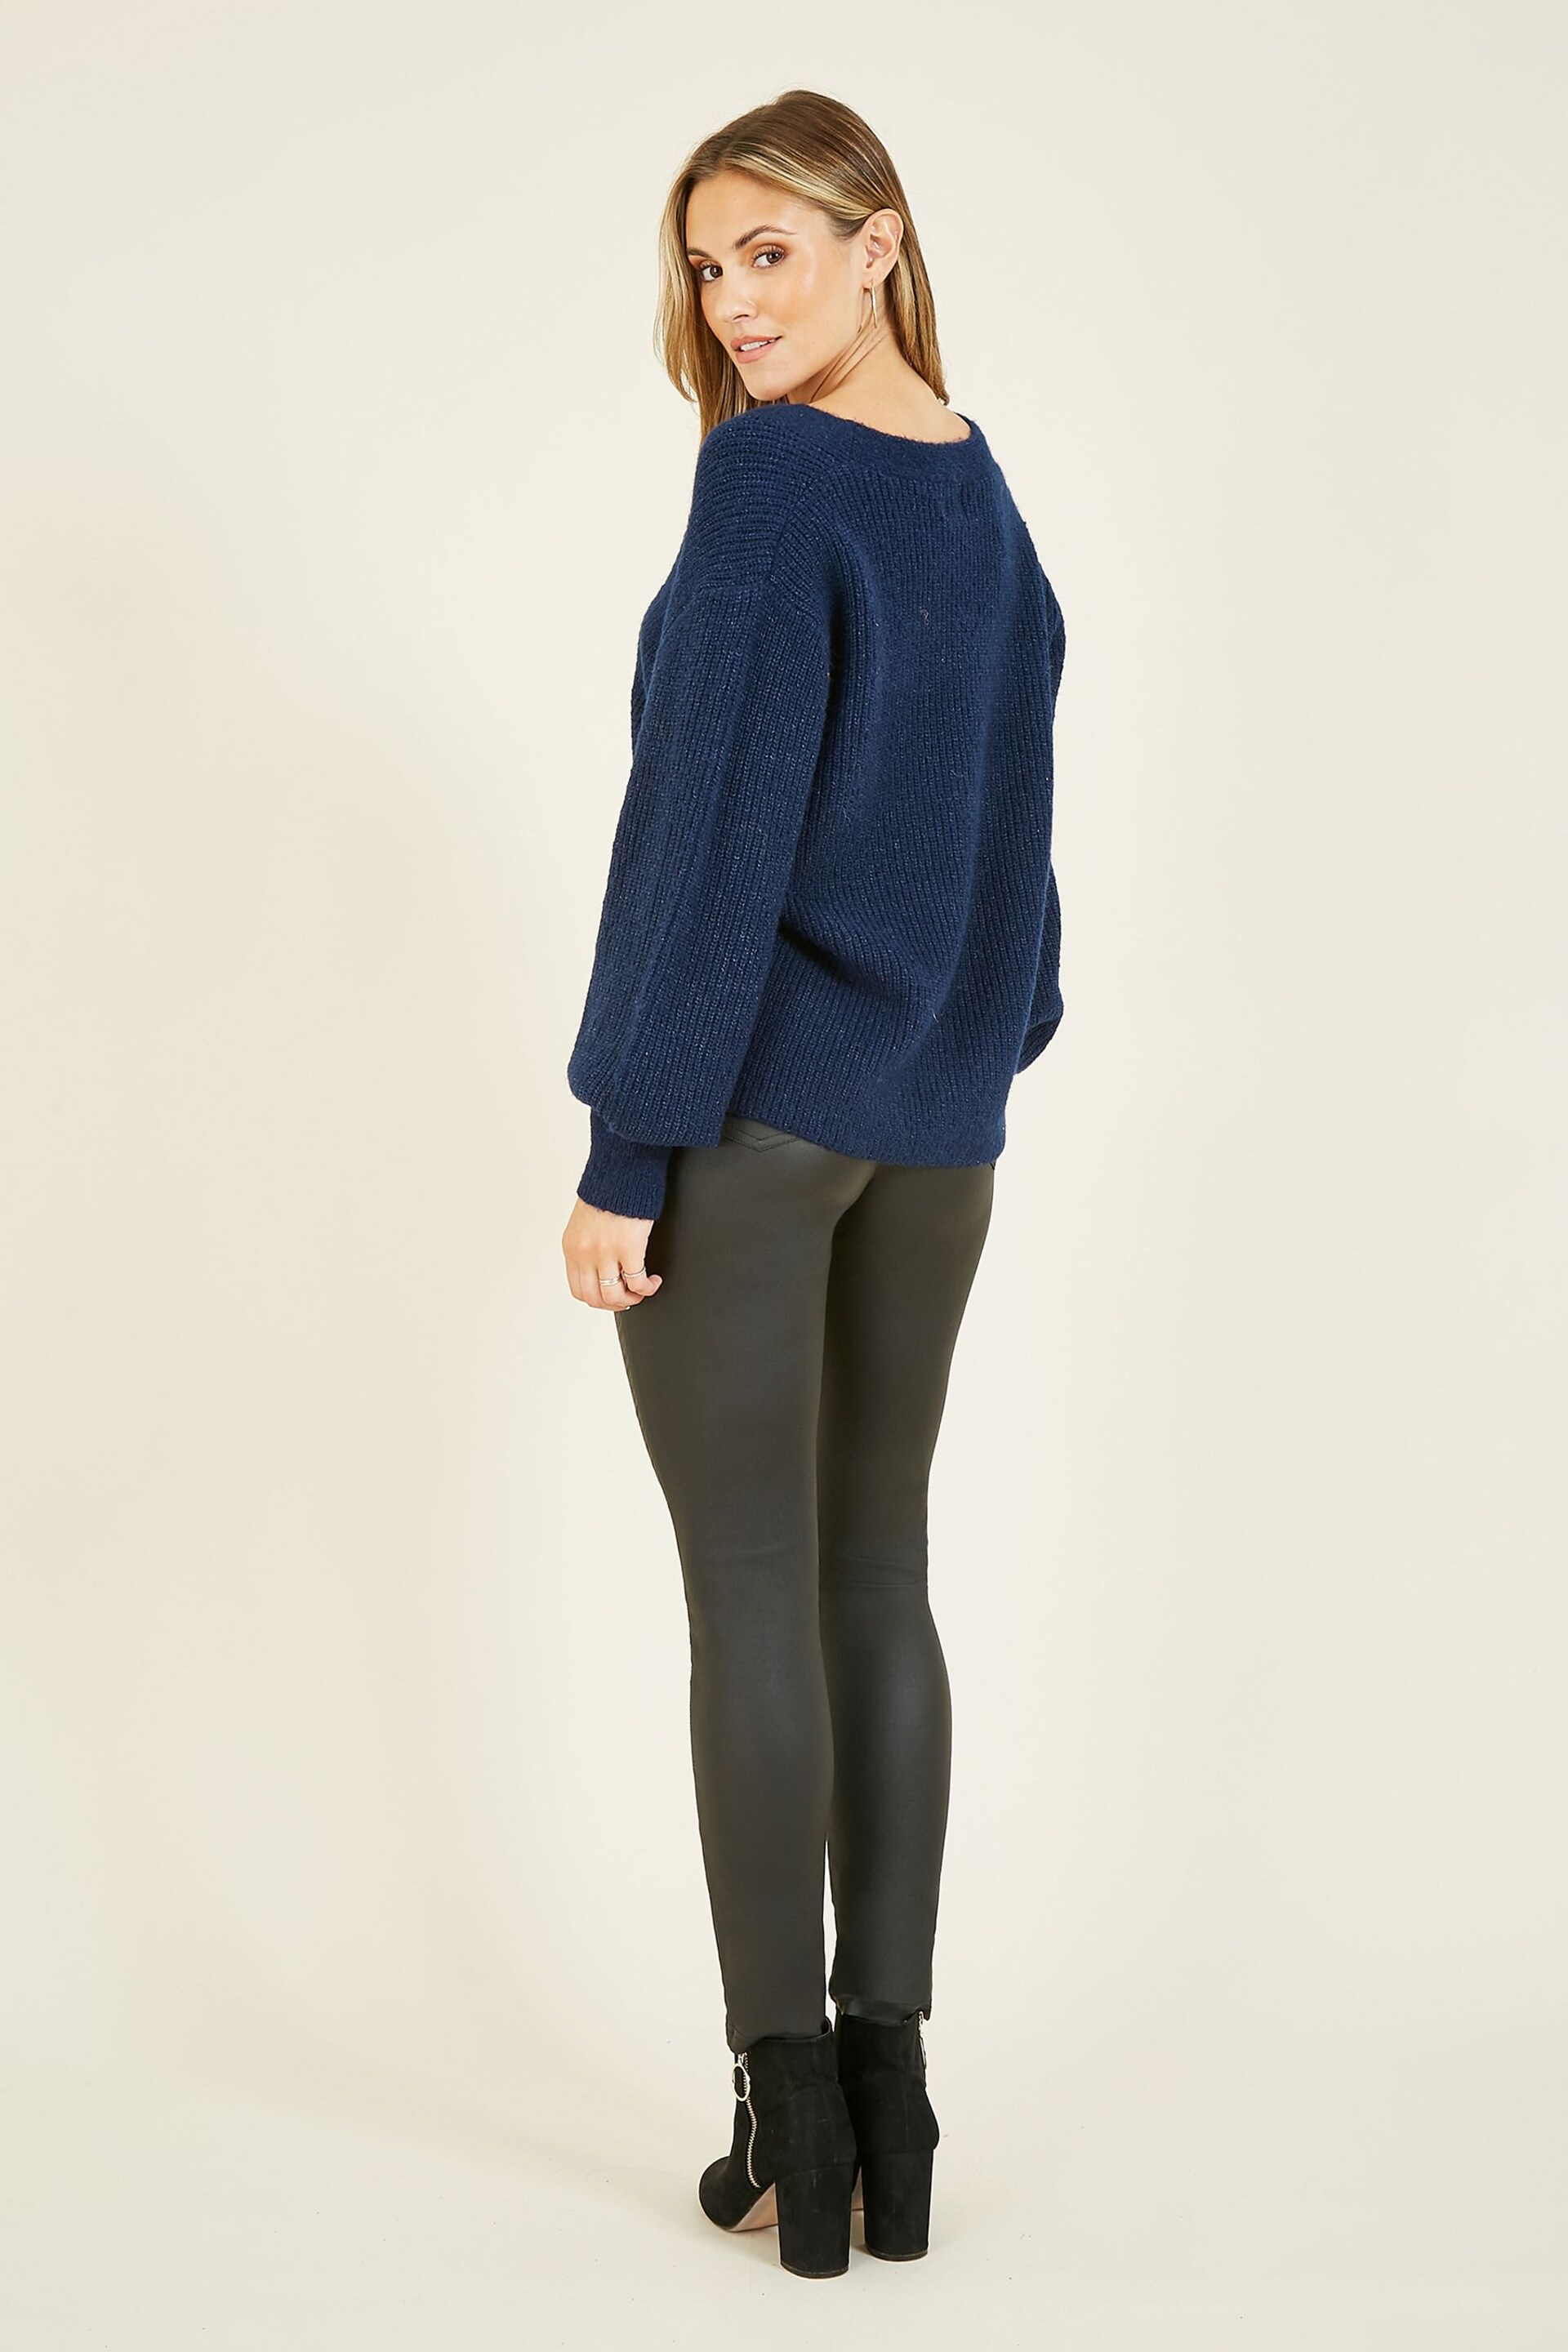 Yumi Blue Button Front Knitted Cardigan - Image 3 of 4